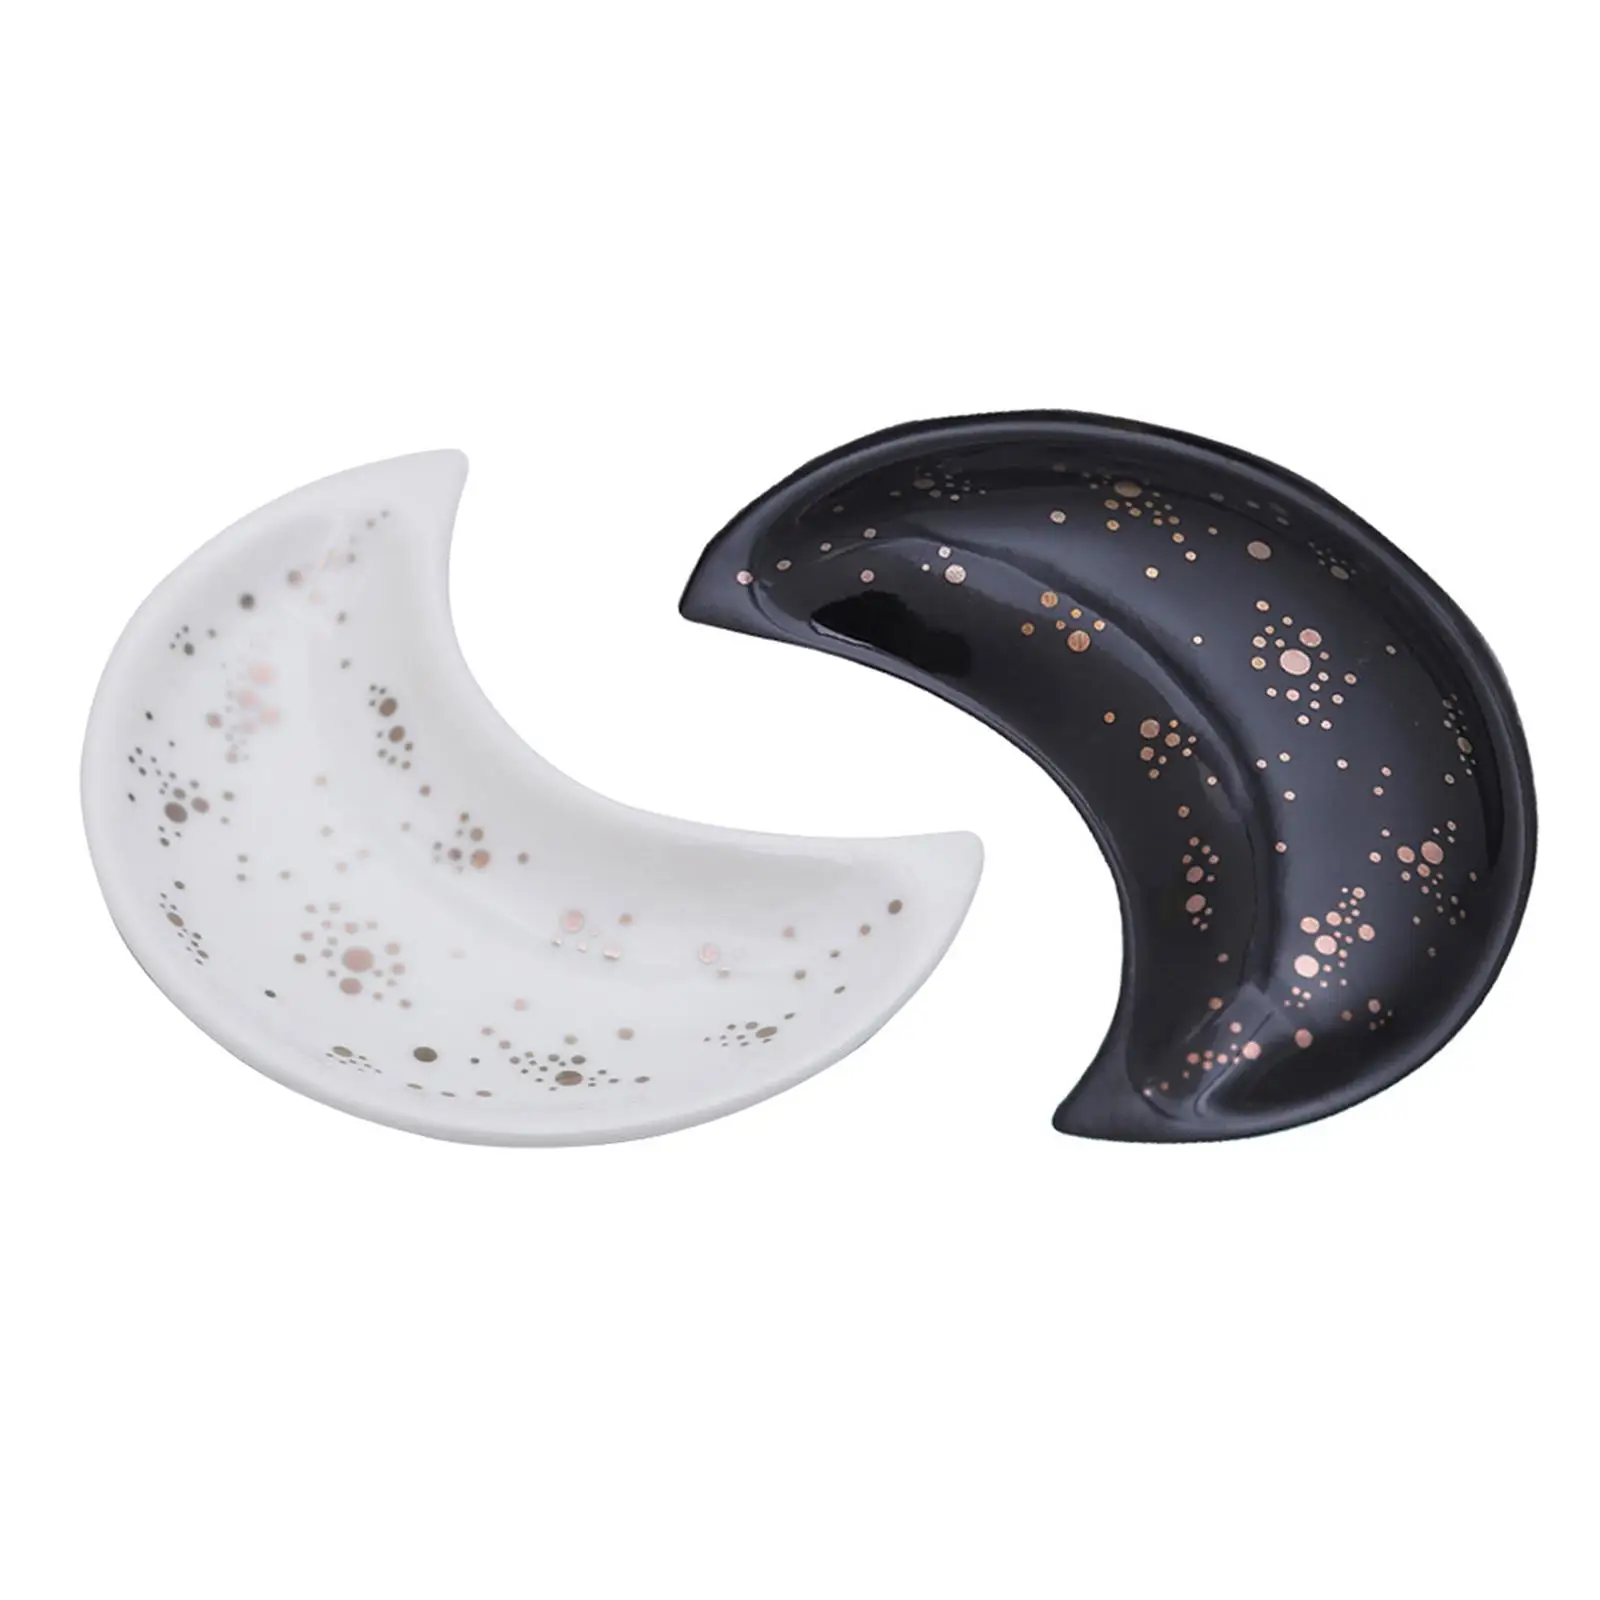 Cermic Moon Jewelry Dish, small Decortive Nordic Holder, for Errings, Rings, Necklce, Fruit Snck Plte Try Dish